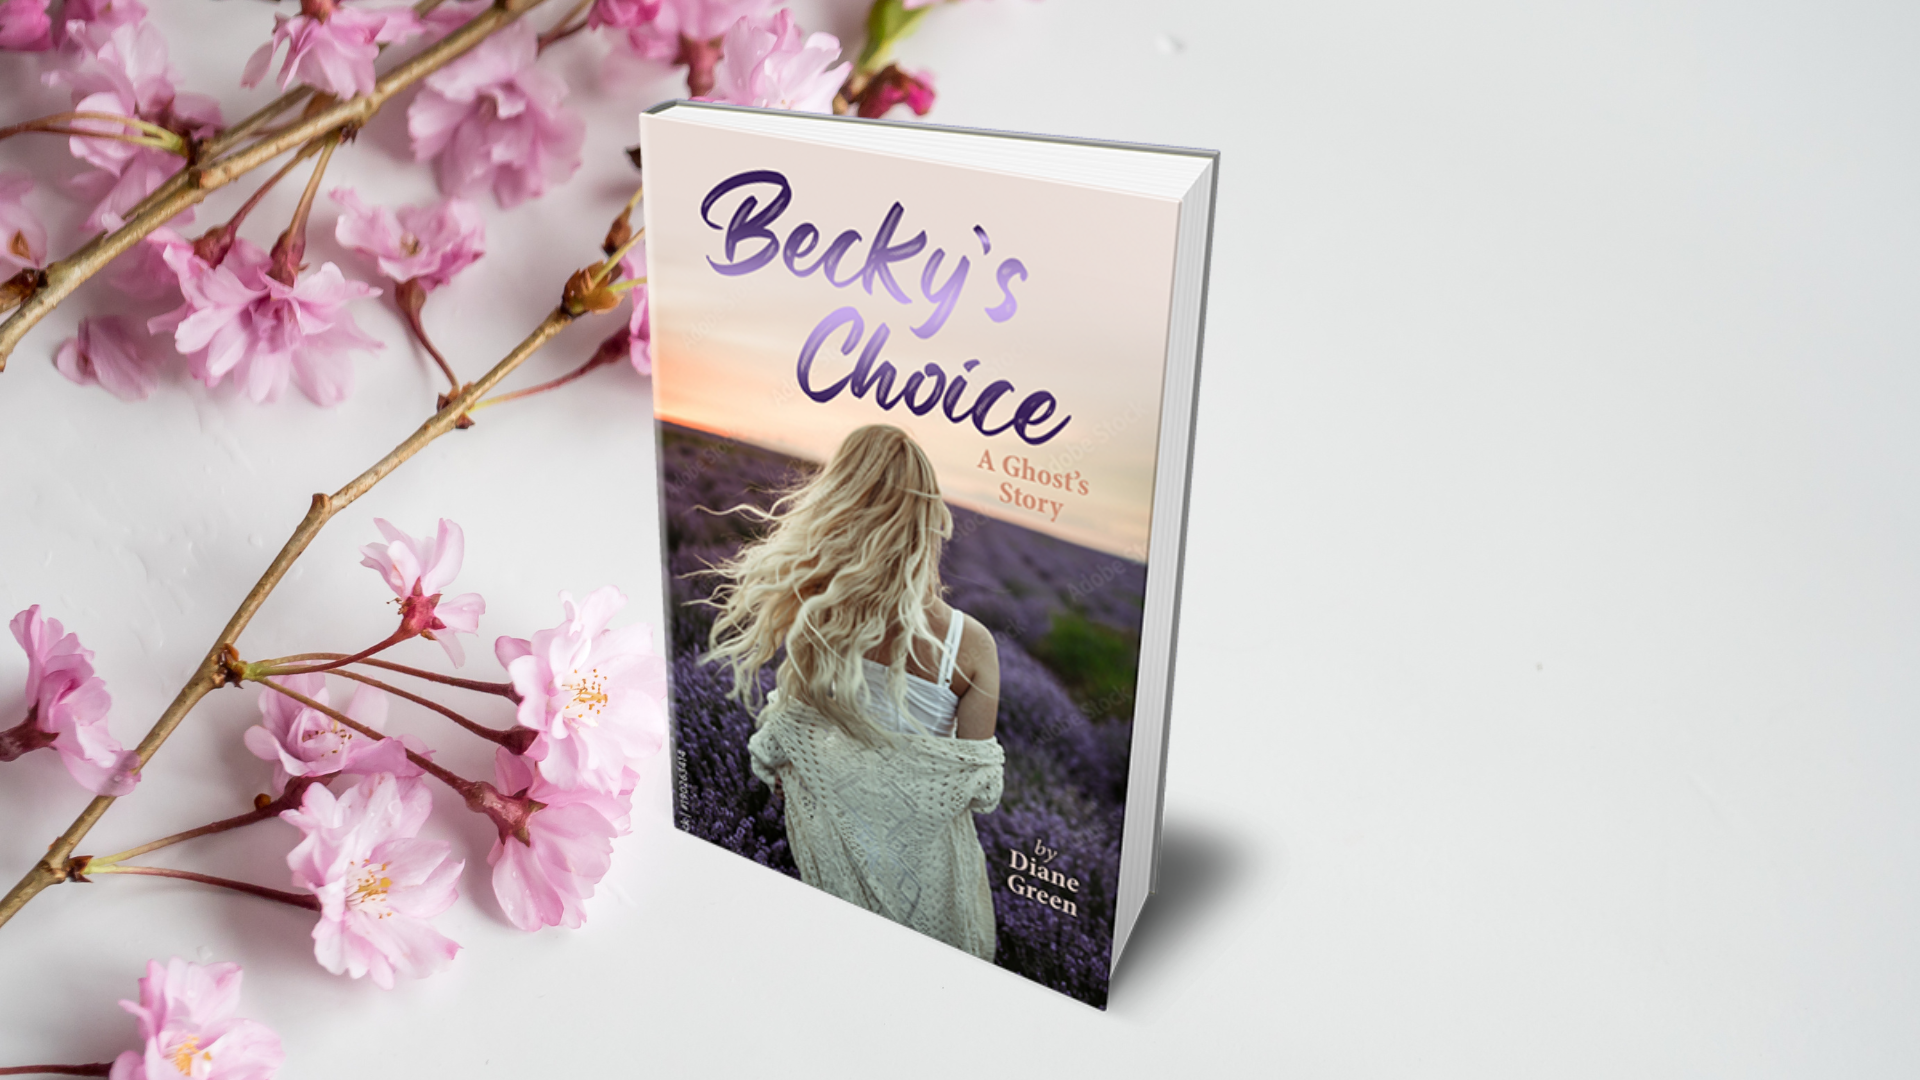 Review of Becky’s Choice, A Ghost’s Story